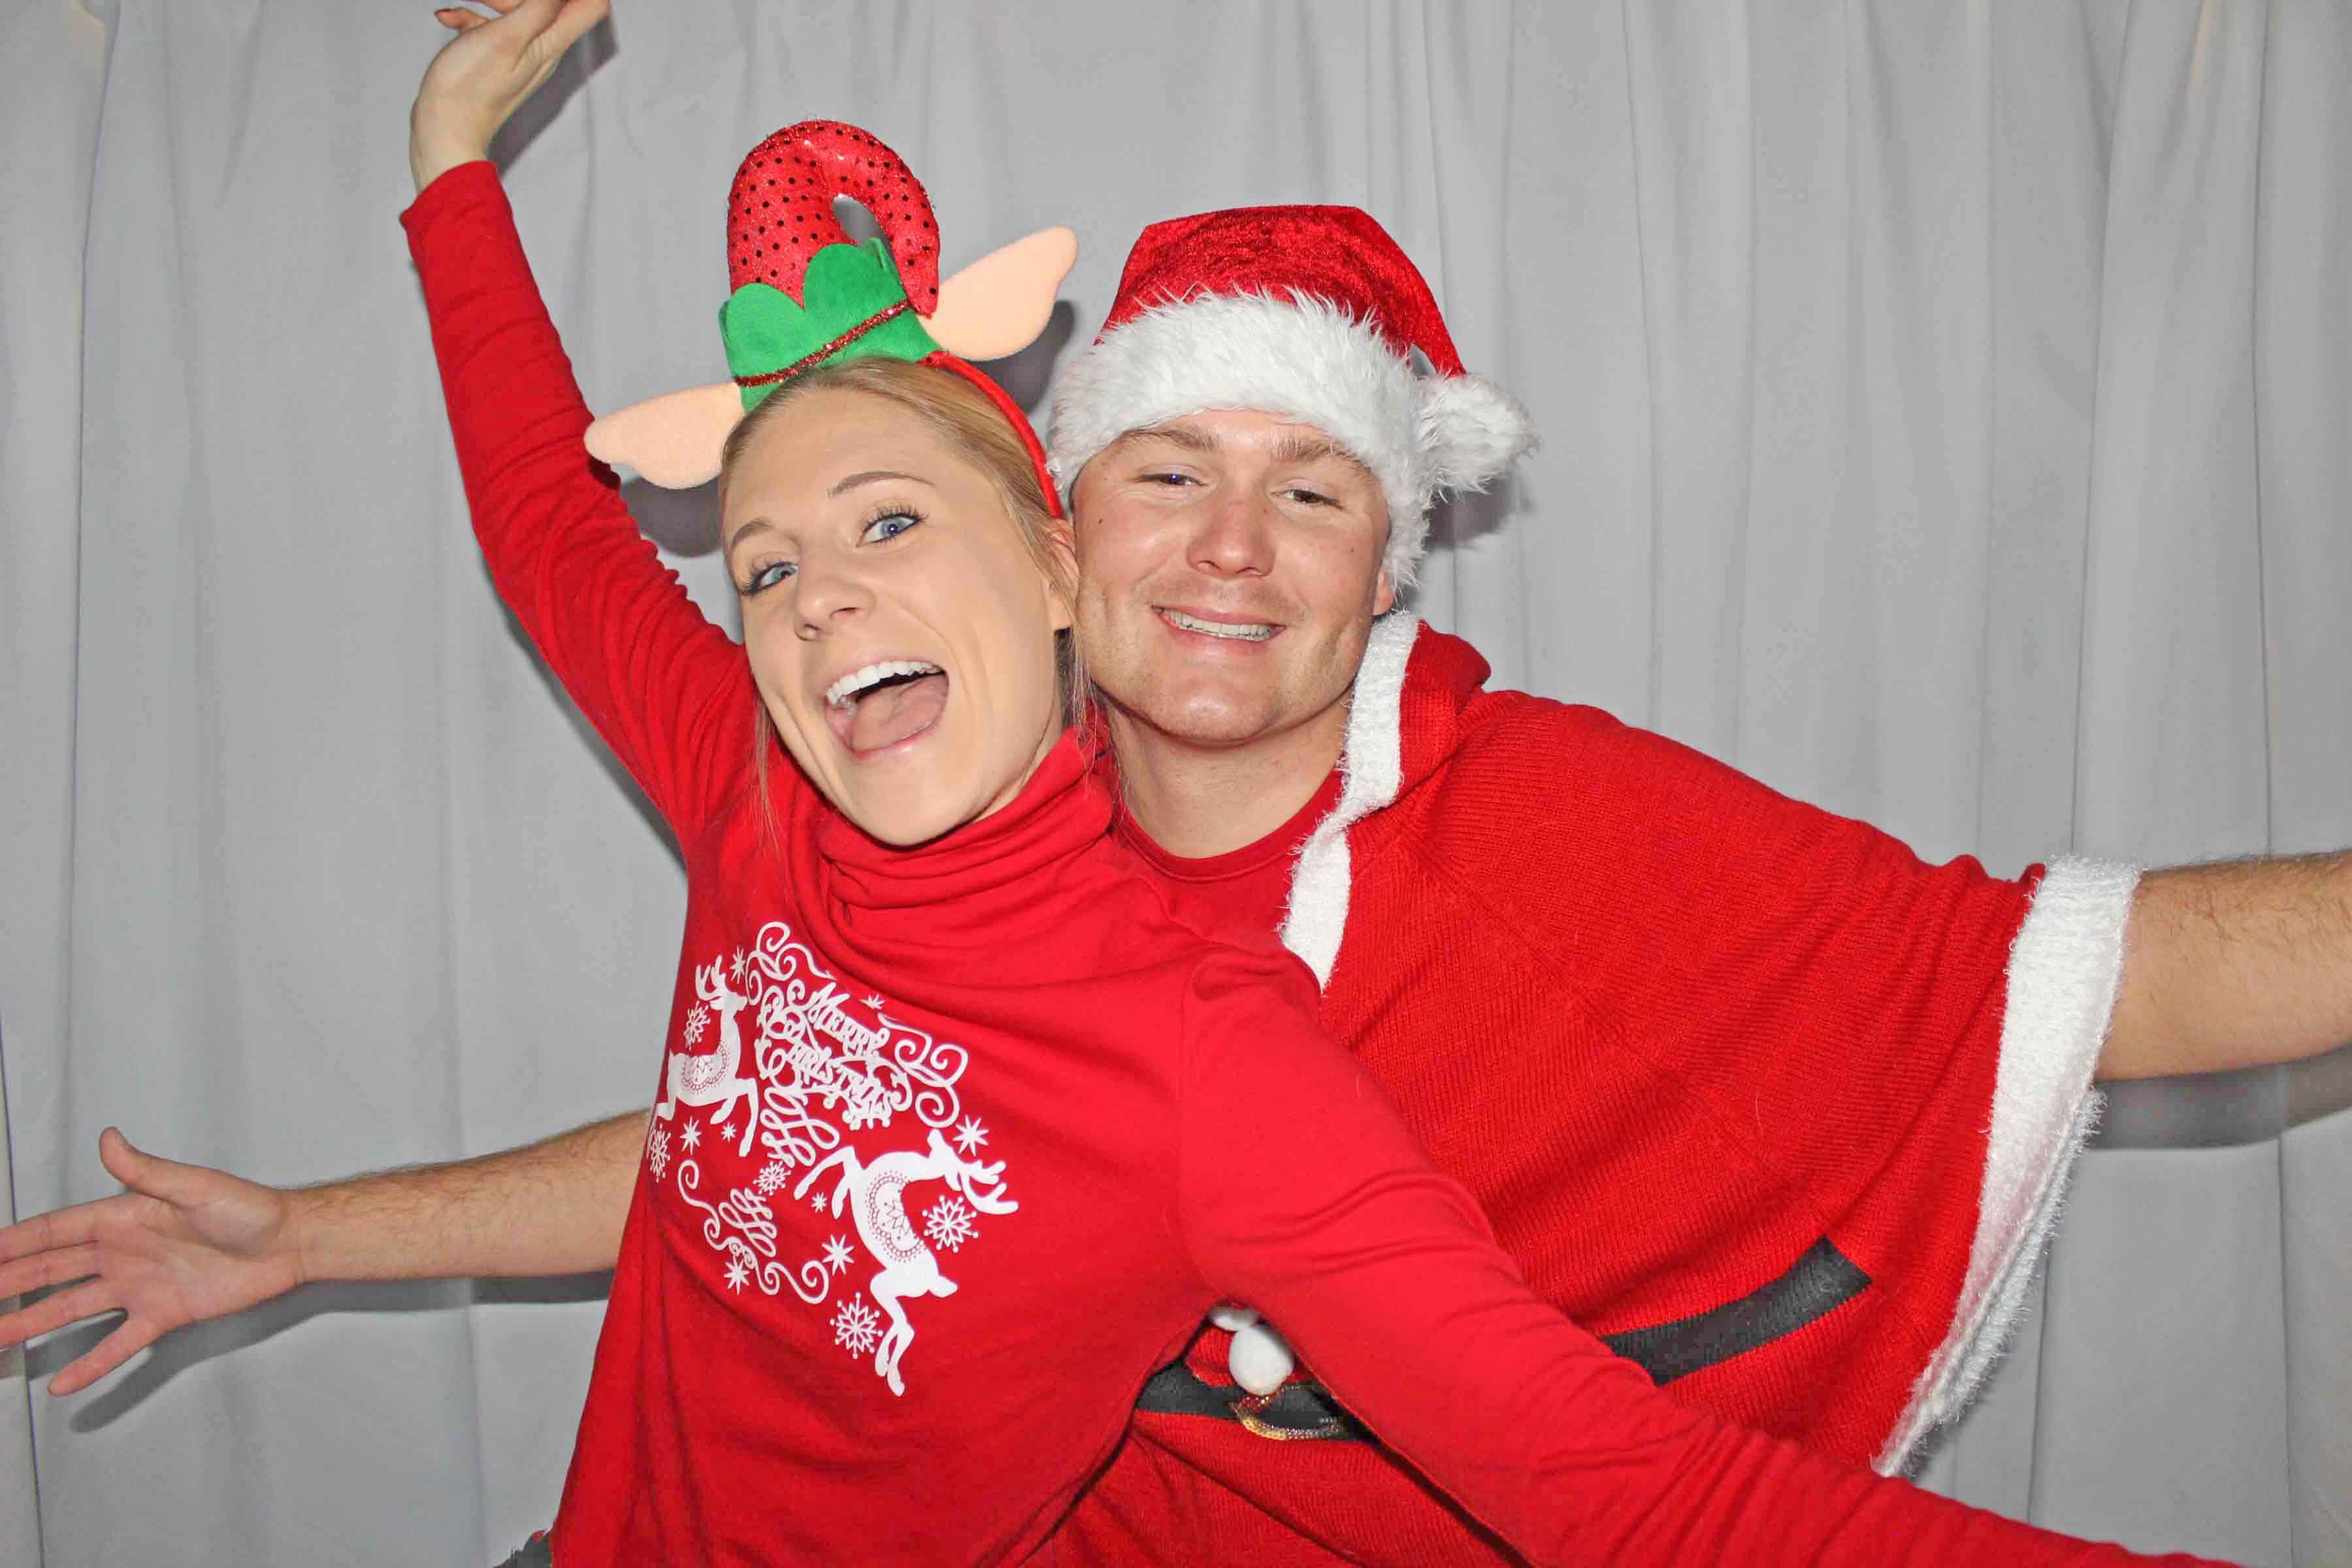 Happy Holidays Photo Booth | Photo Booth Rental